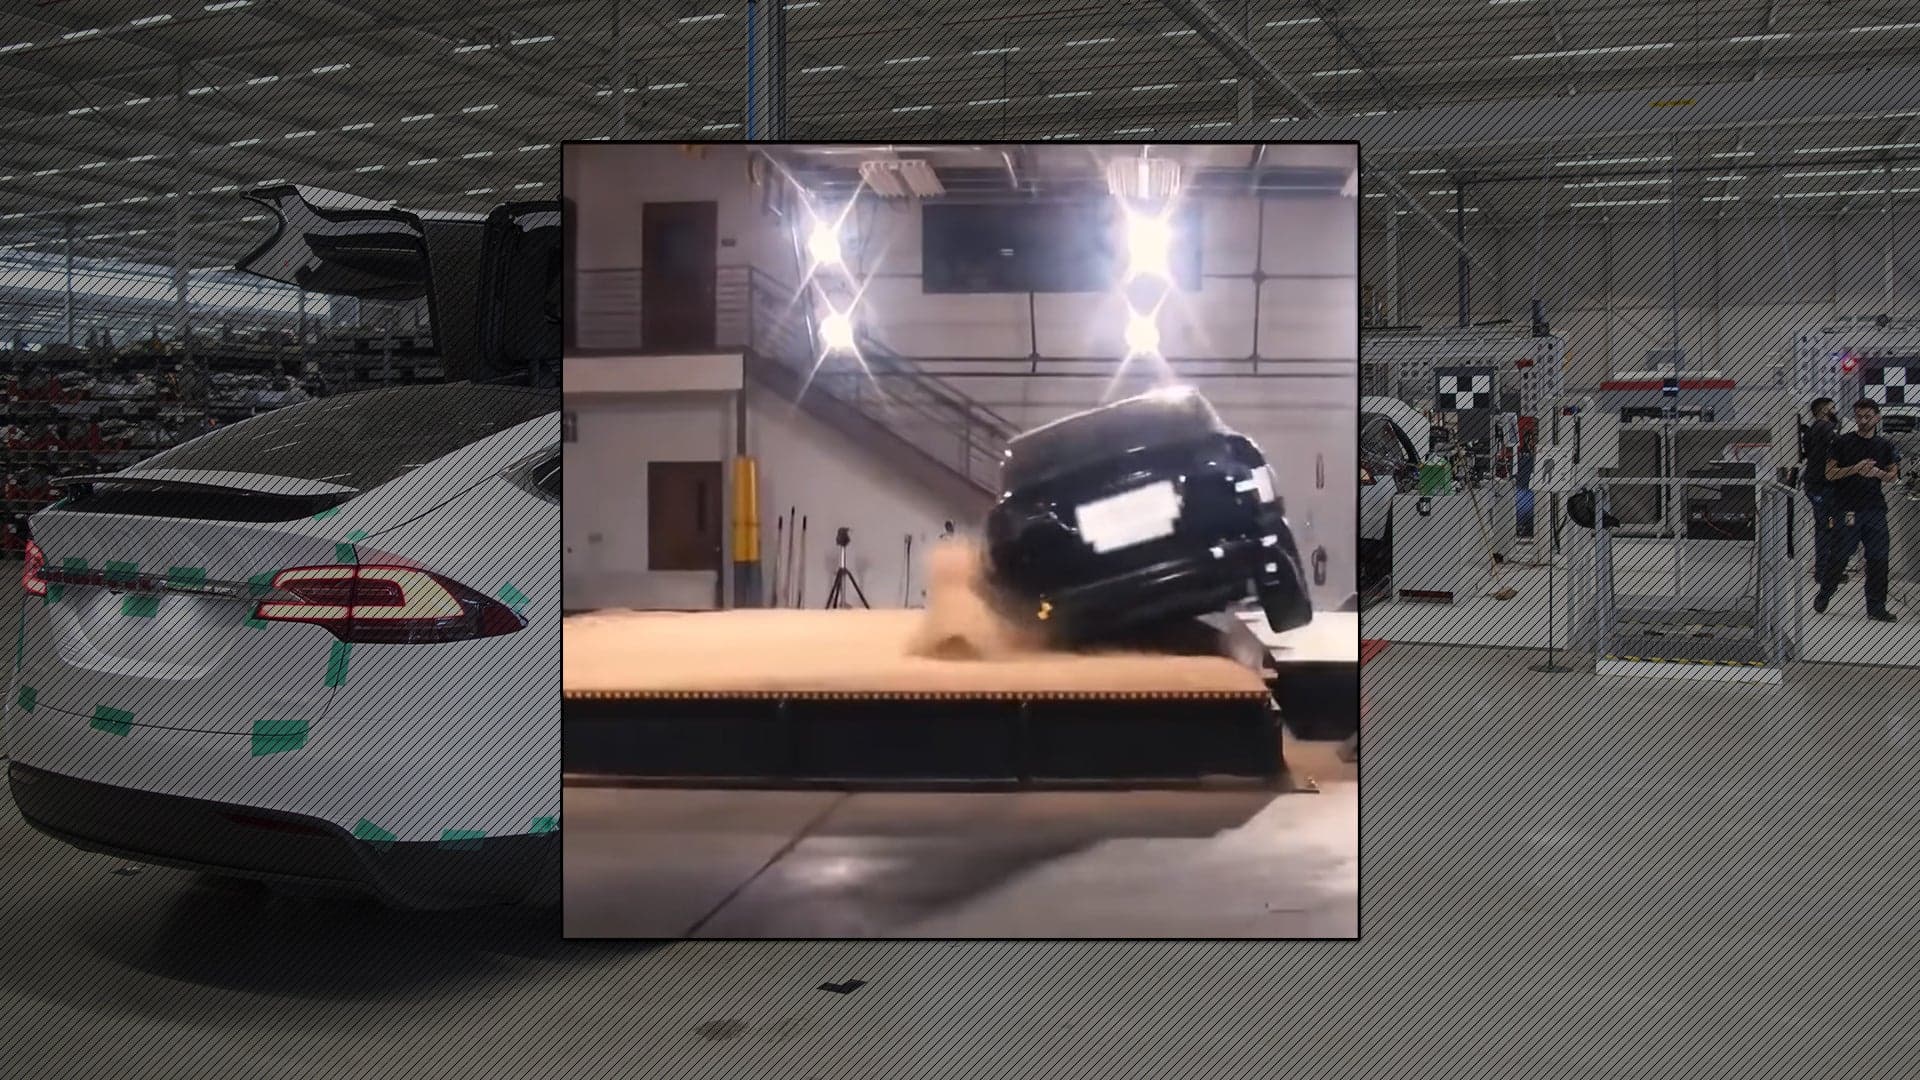 Watch Tesla (Unsuccessfully) Try to Roll the Model X During Crash Tests